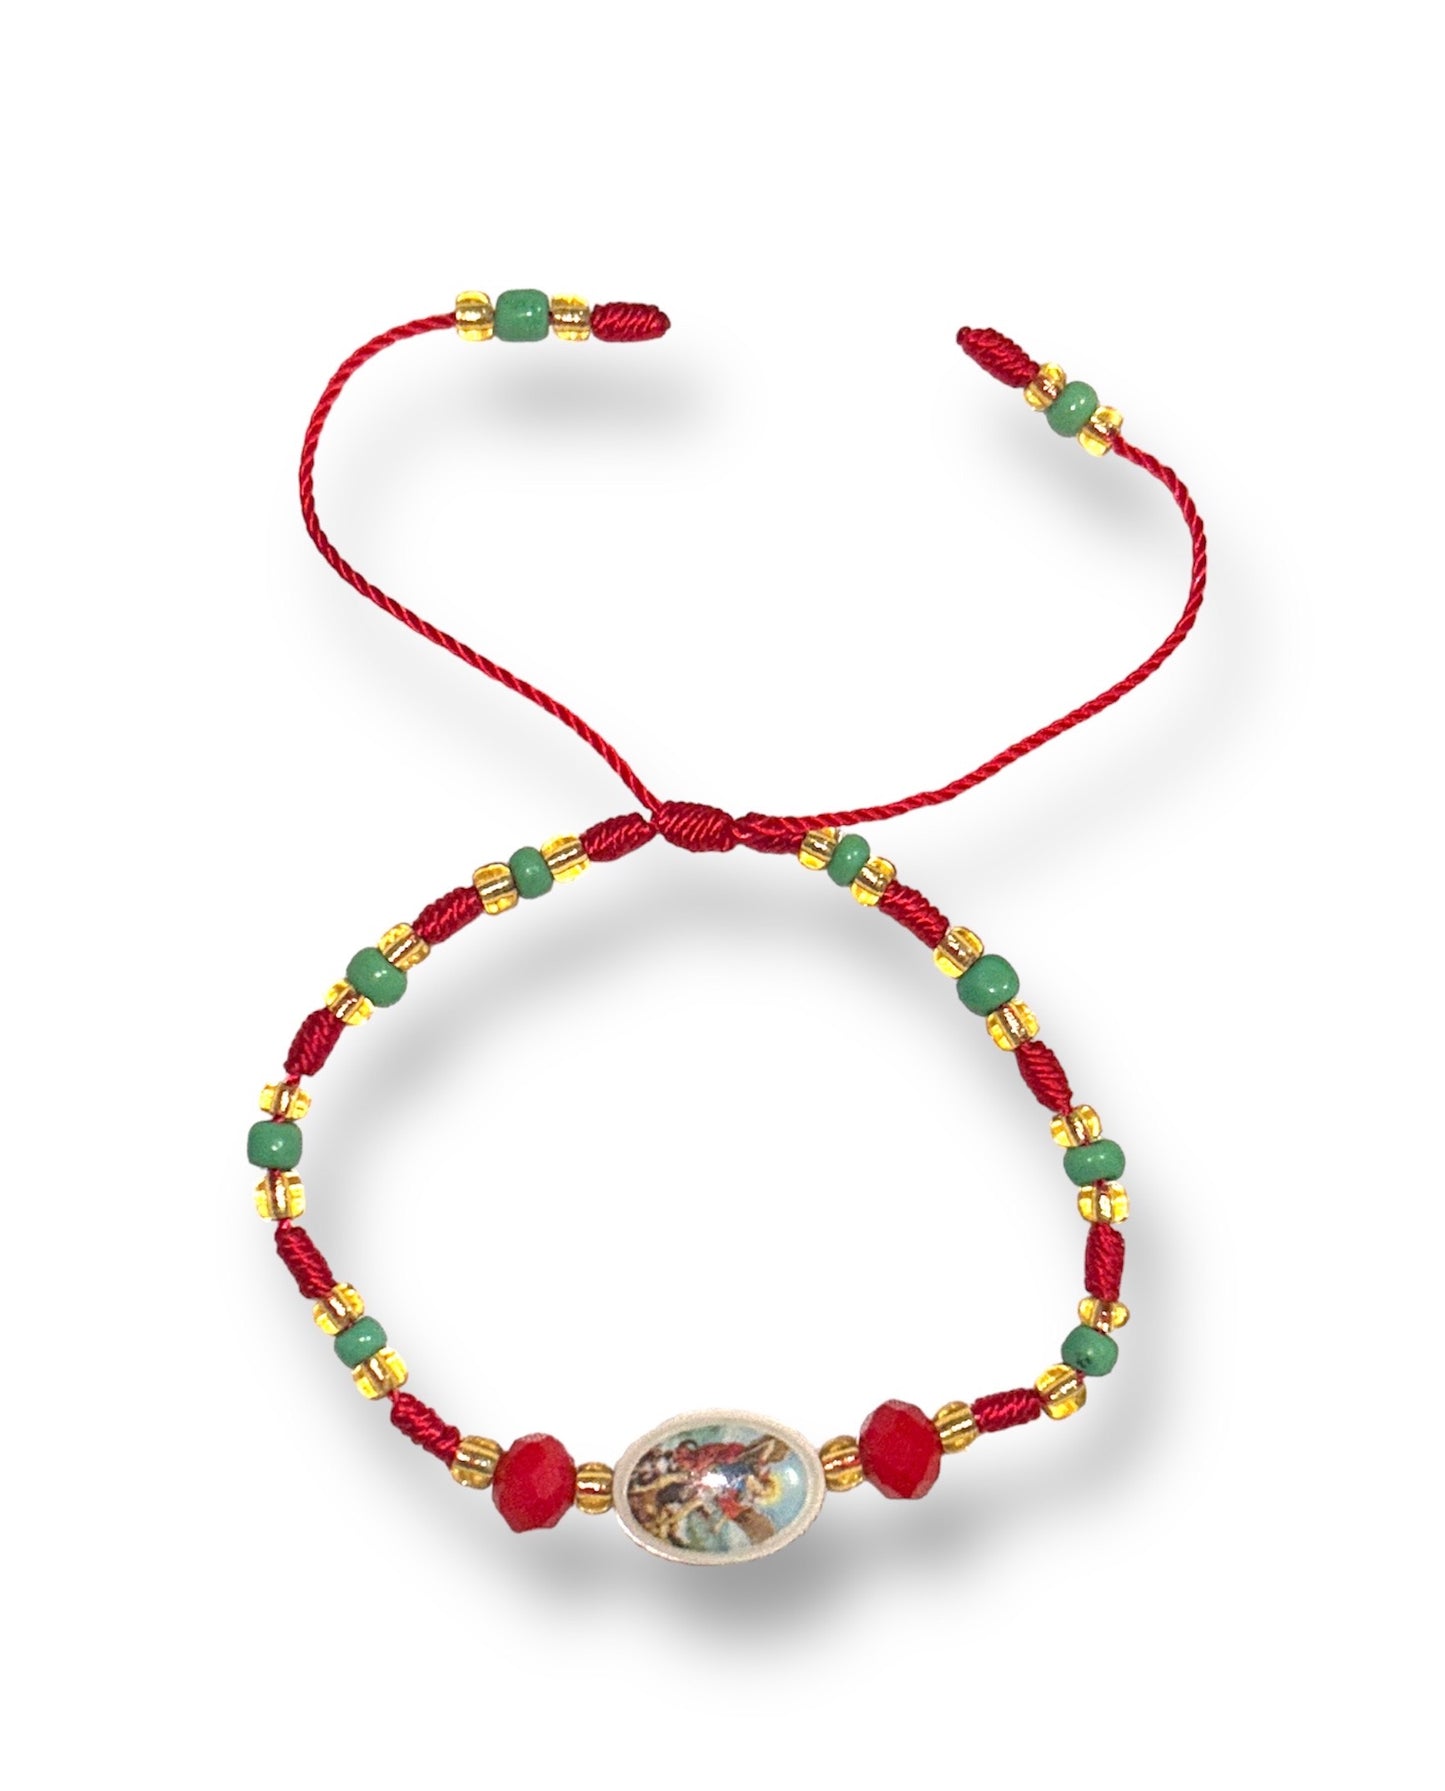 Saint Michael Bracelet - Red String with Green Beads and Red Crystals for Powerful Protection